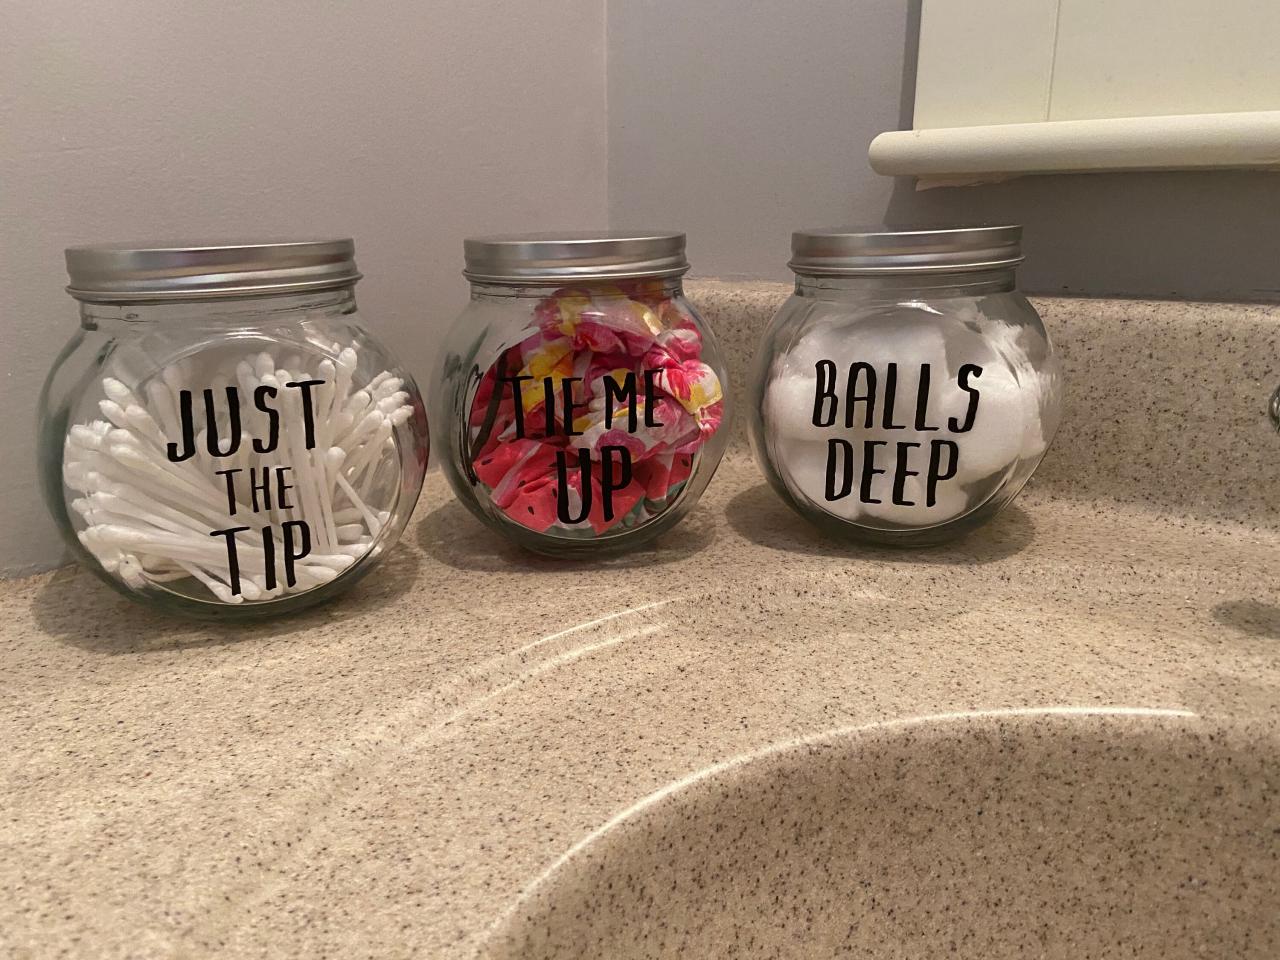 Funny Adult Humor Inappropriate Bathroom Home Jar Decor Stick Etsy